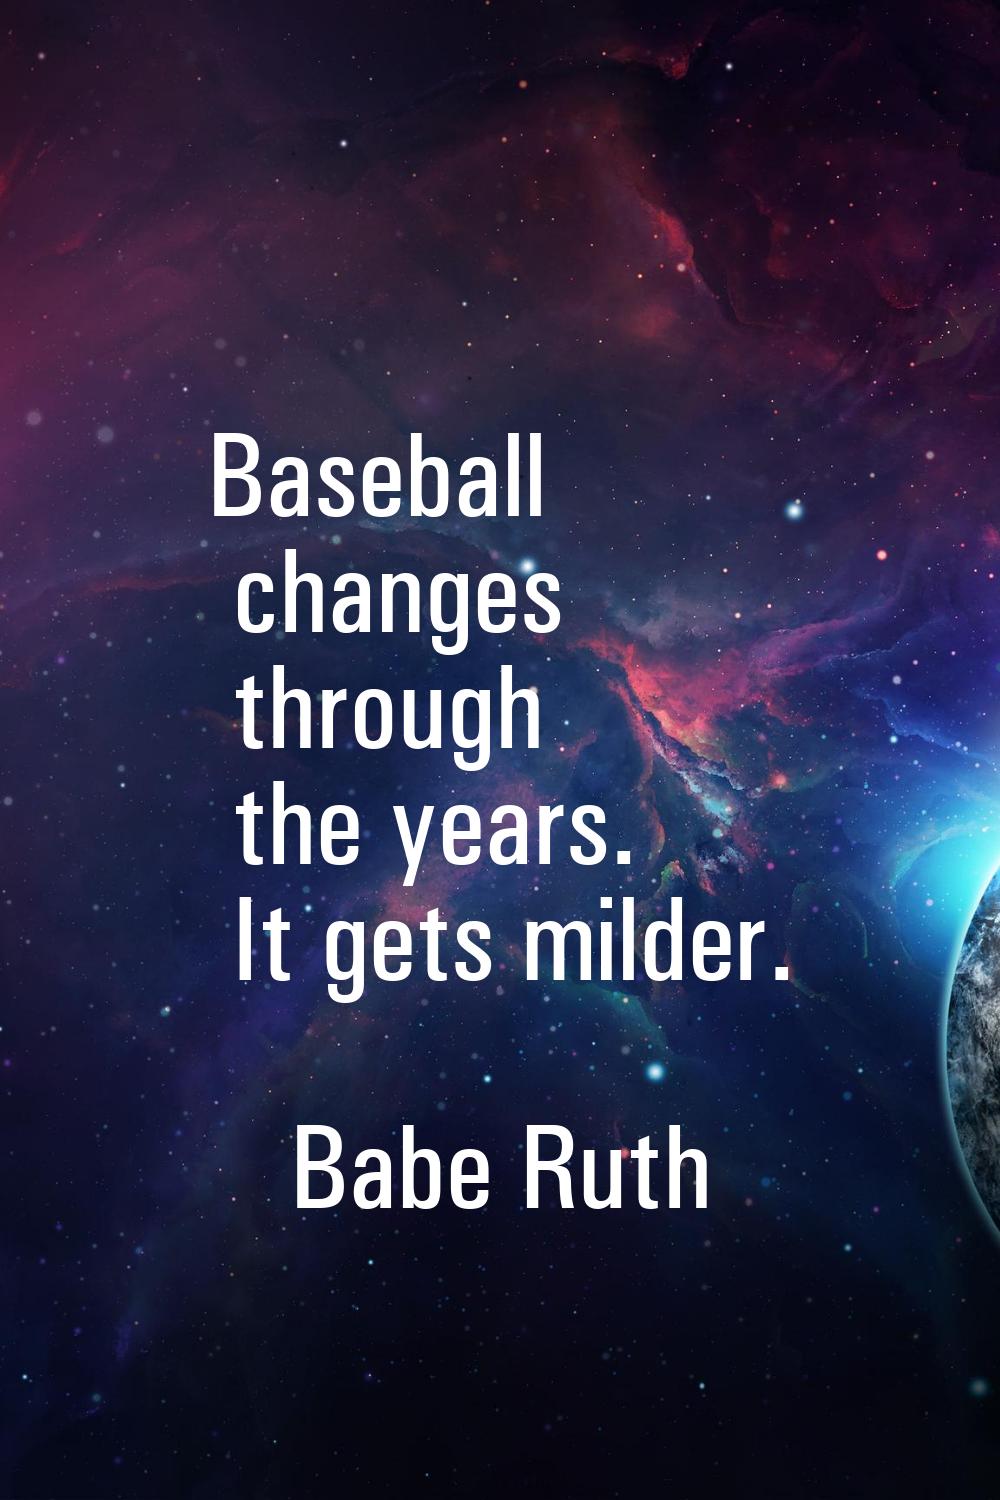 Baseball changes through the years. It gets milder.